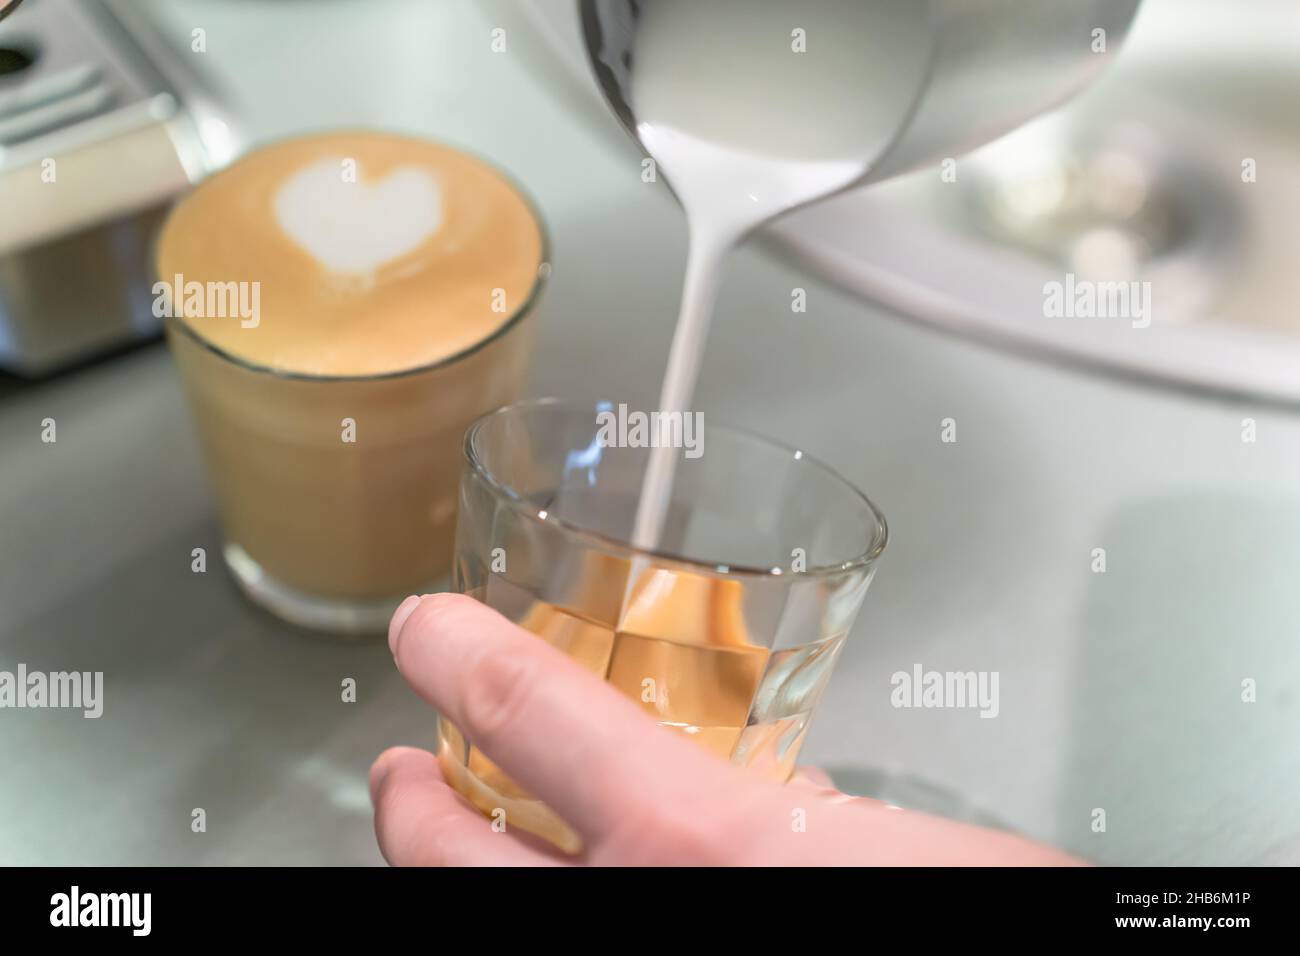 Barista pours whipped milk into a glass. Stock Photo